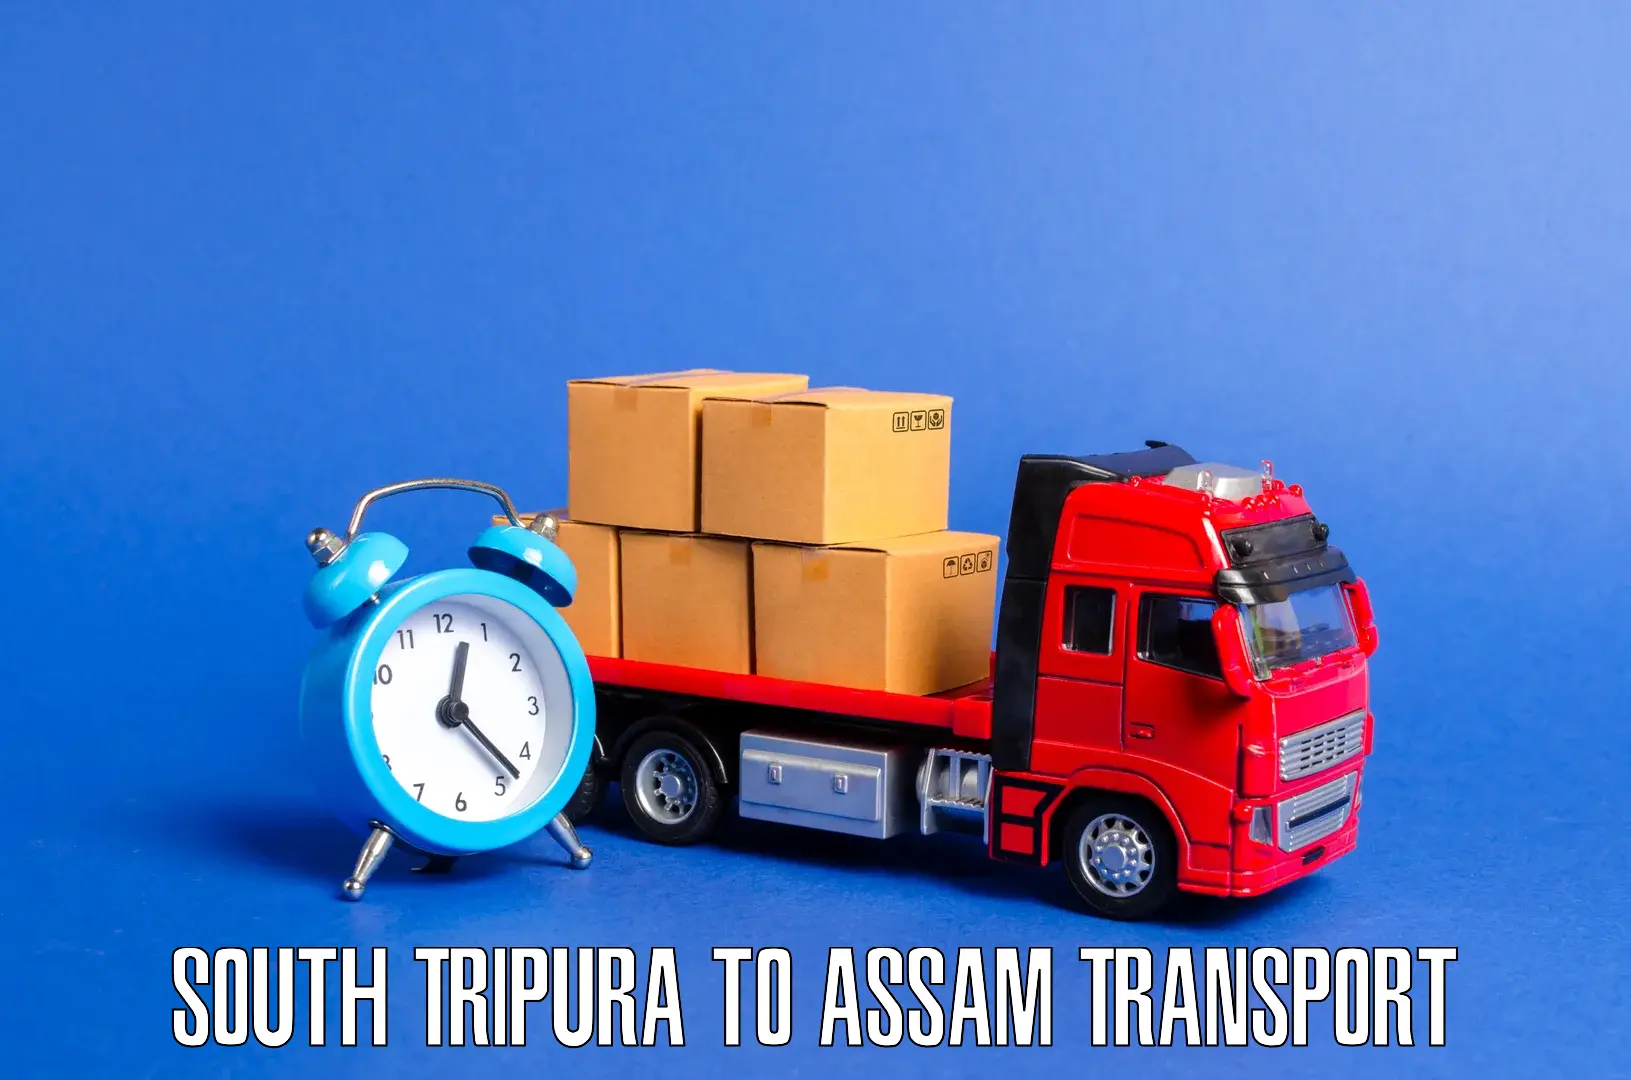 Transport bike from one state to another South Tripura to Jamuguri